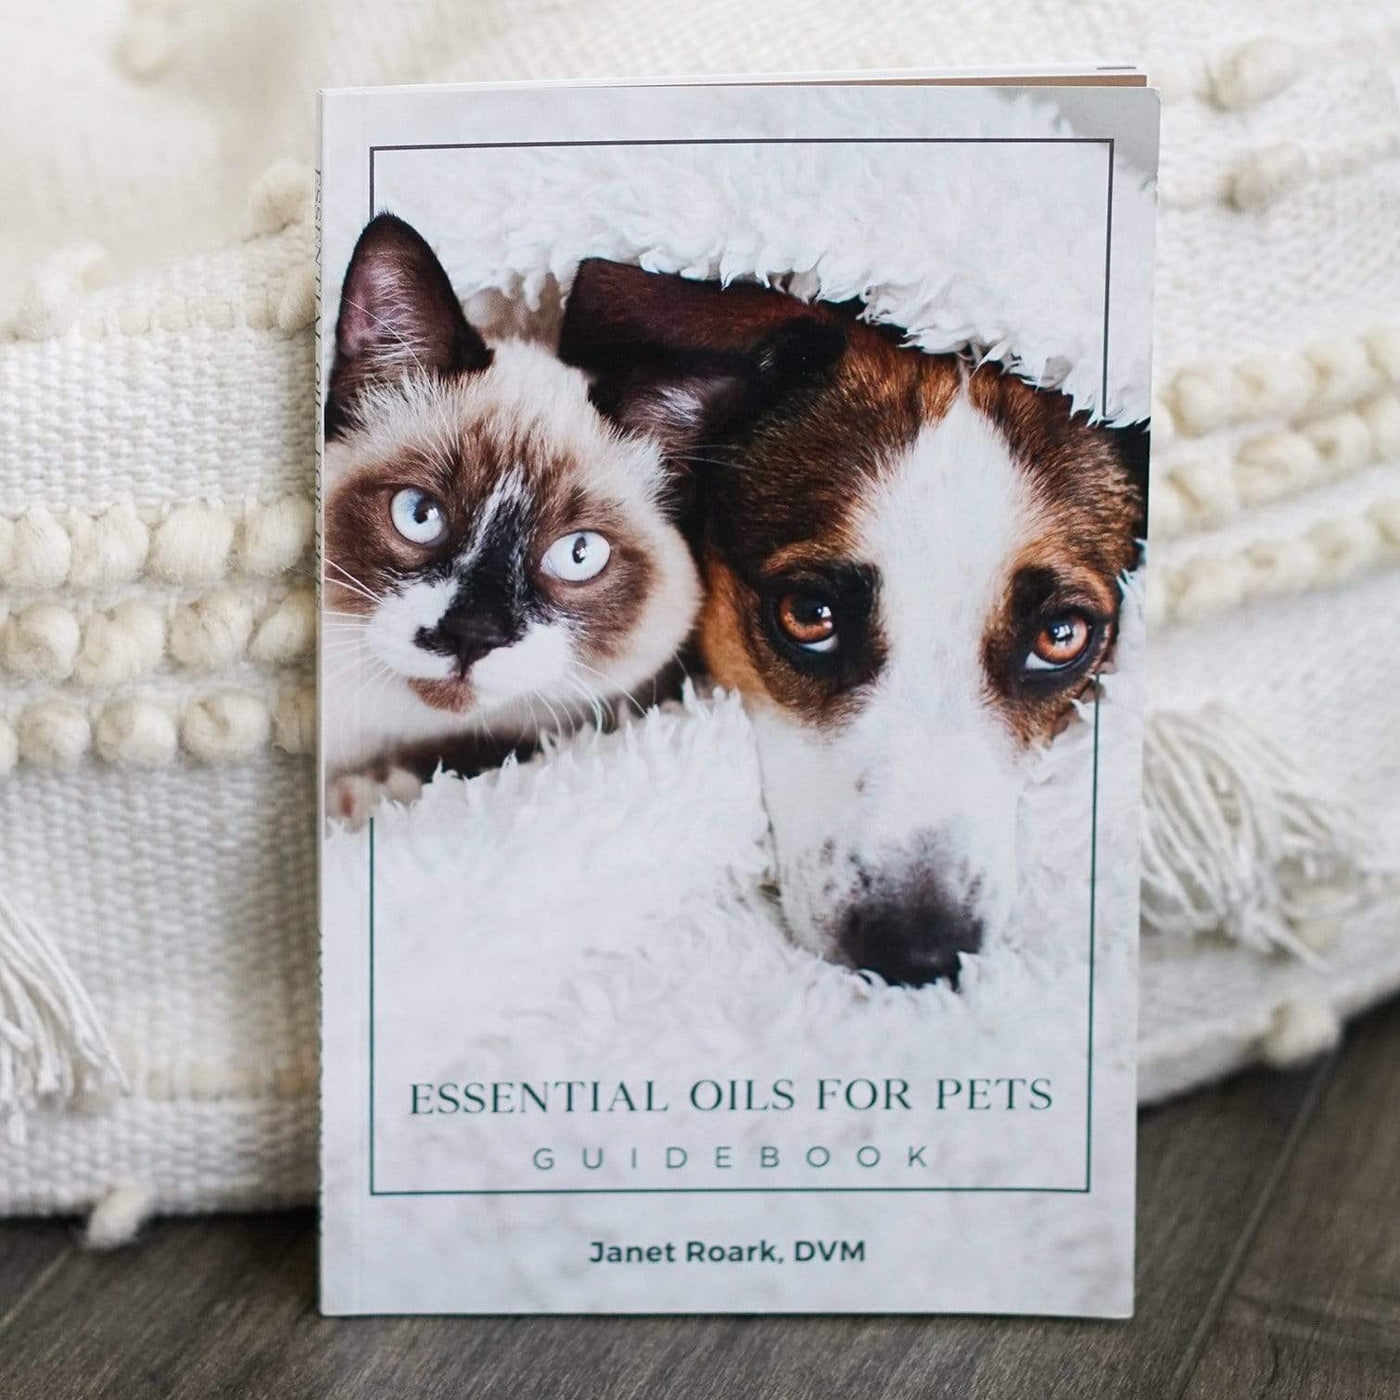 Essential Oils for Pets Guidebook - Oil Life Canada - Canada's Best Essential Oil Supplies